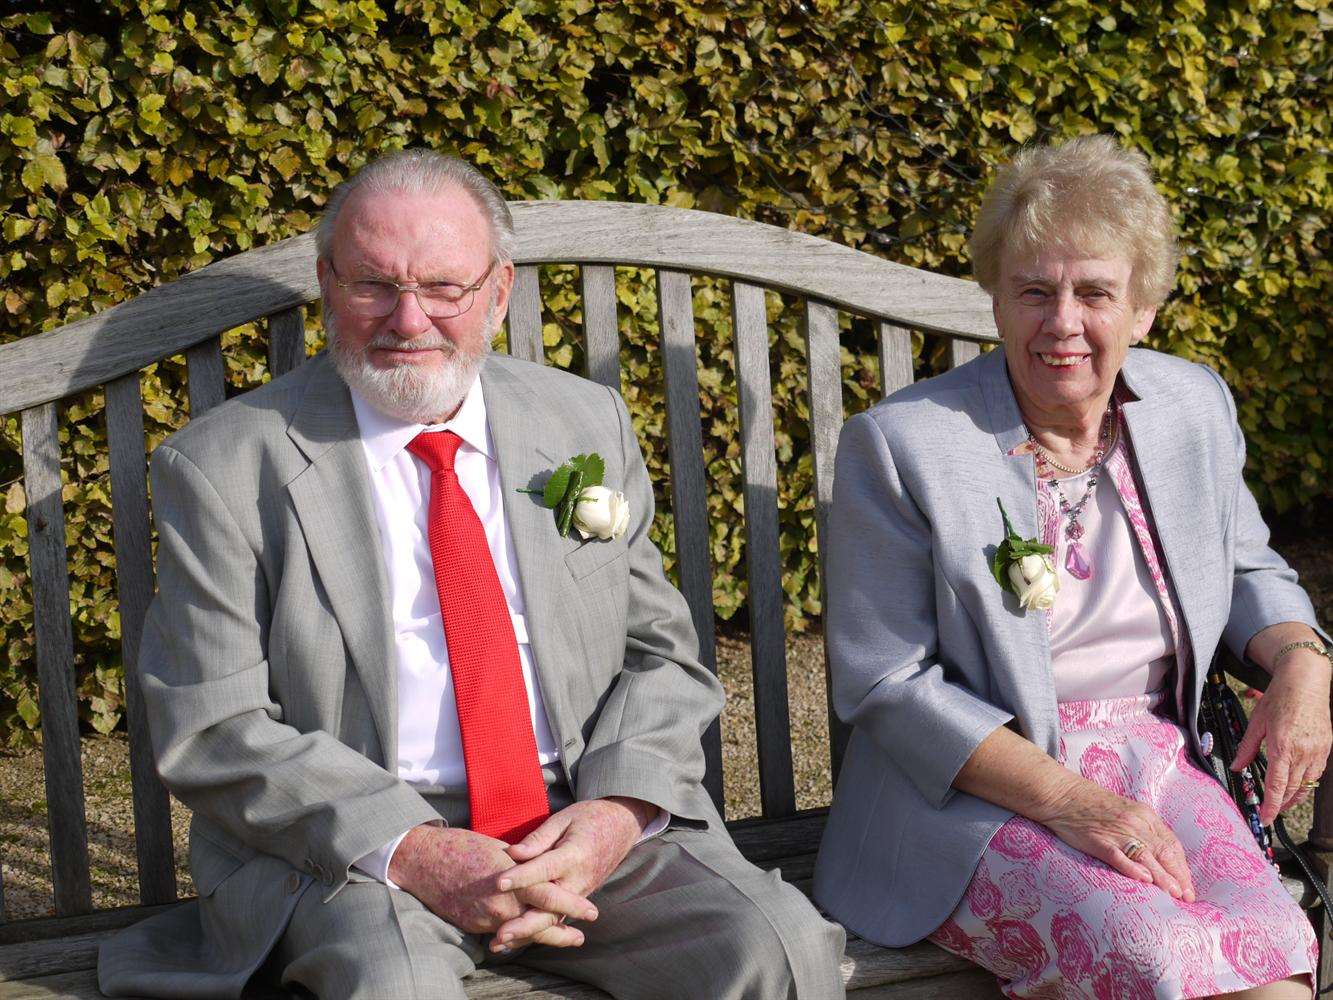 Cllr Muckle at a family wedding with his wife Ann, who he met as a young man at a youth club in Dartford.